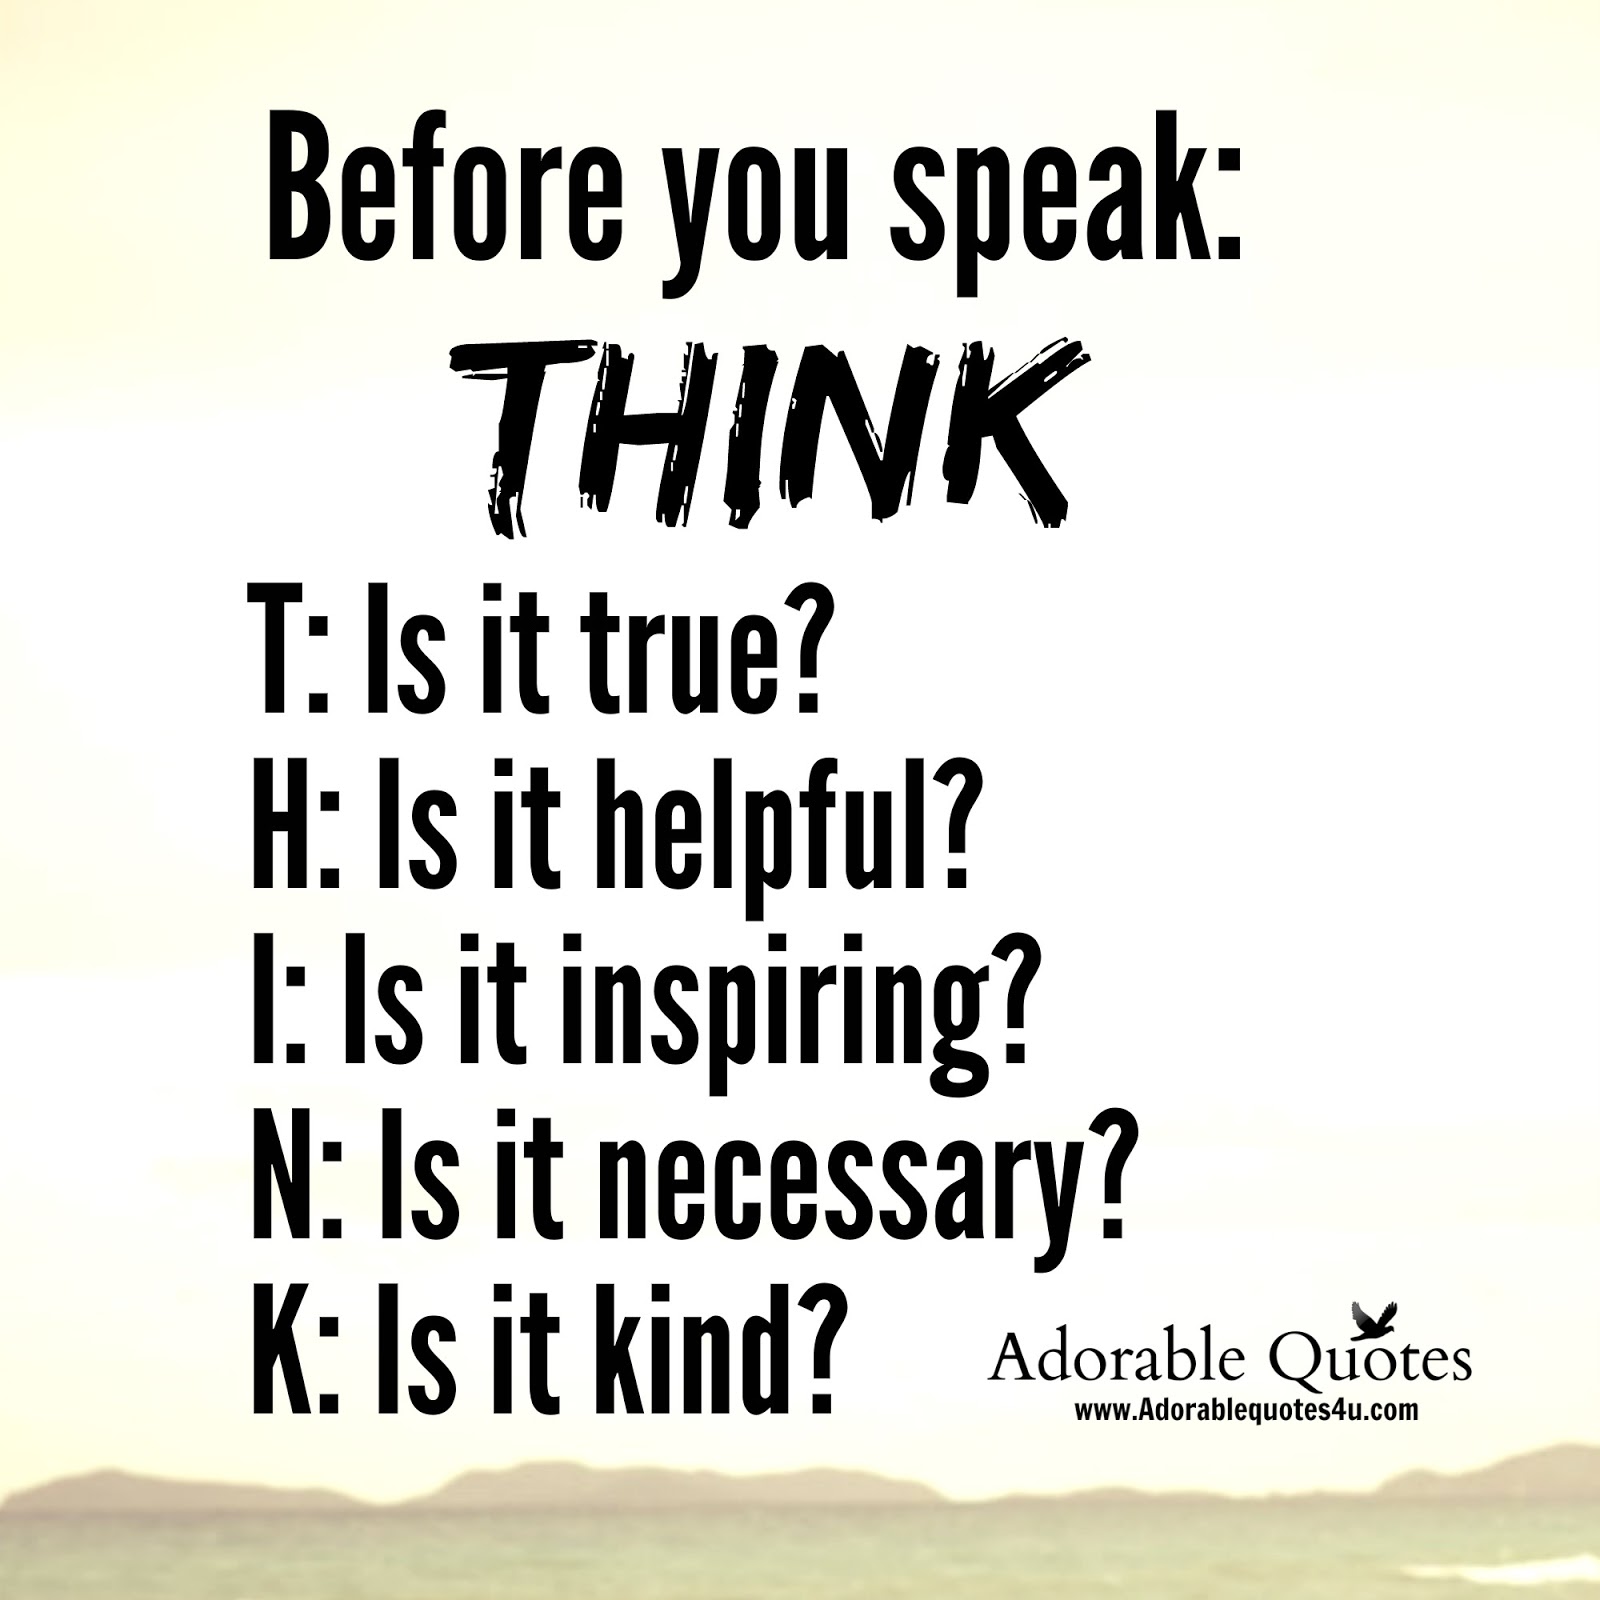 Think before you speak. Is it kind is it necessary. Before you speak think Kill yourself.